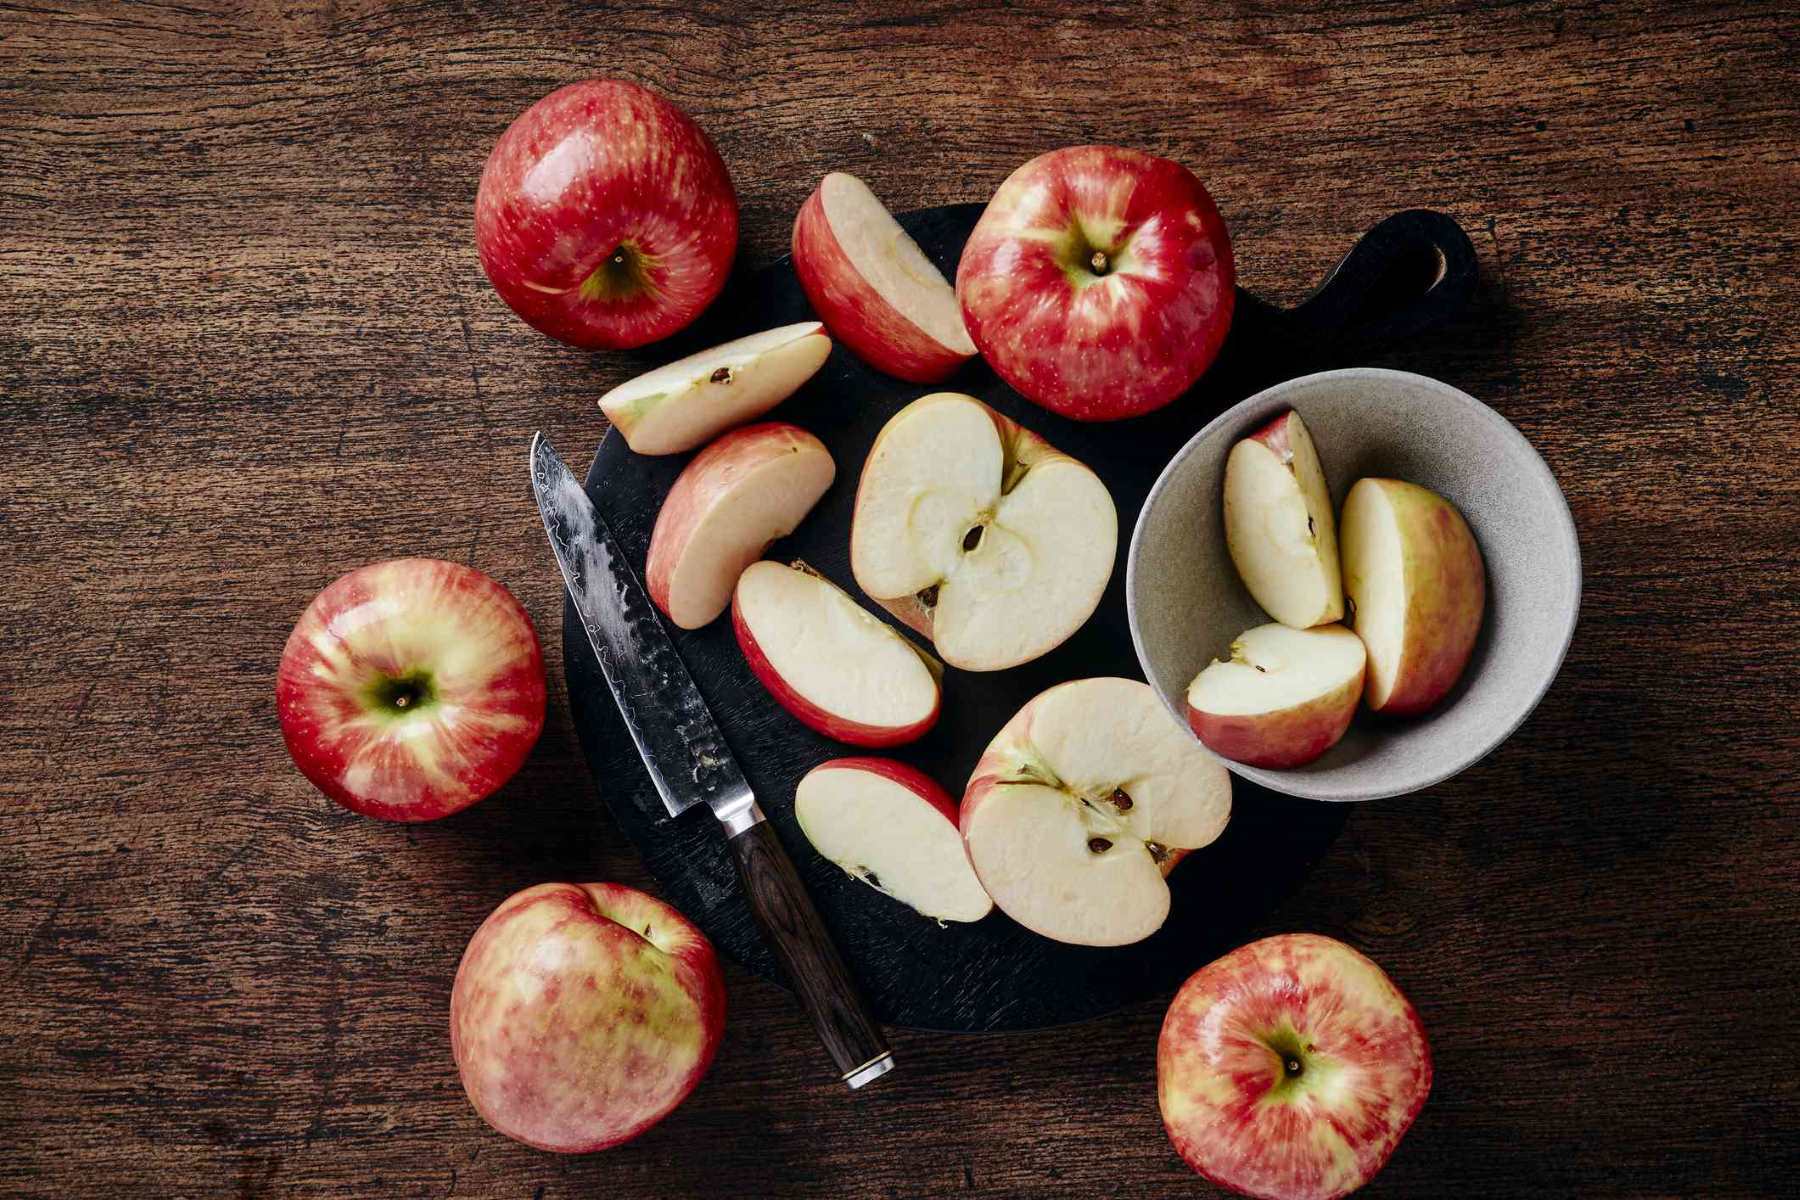 Can Apple Seeds Be Harmful To Your Health?